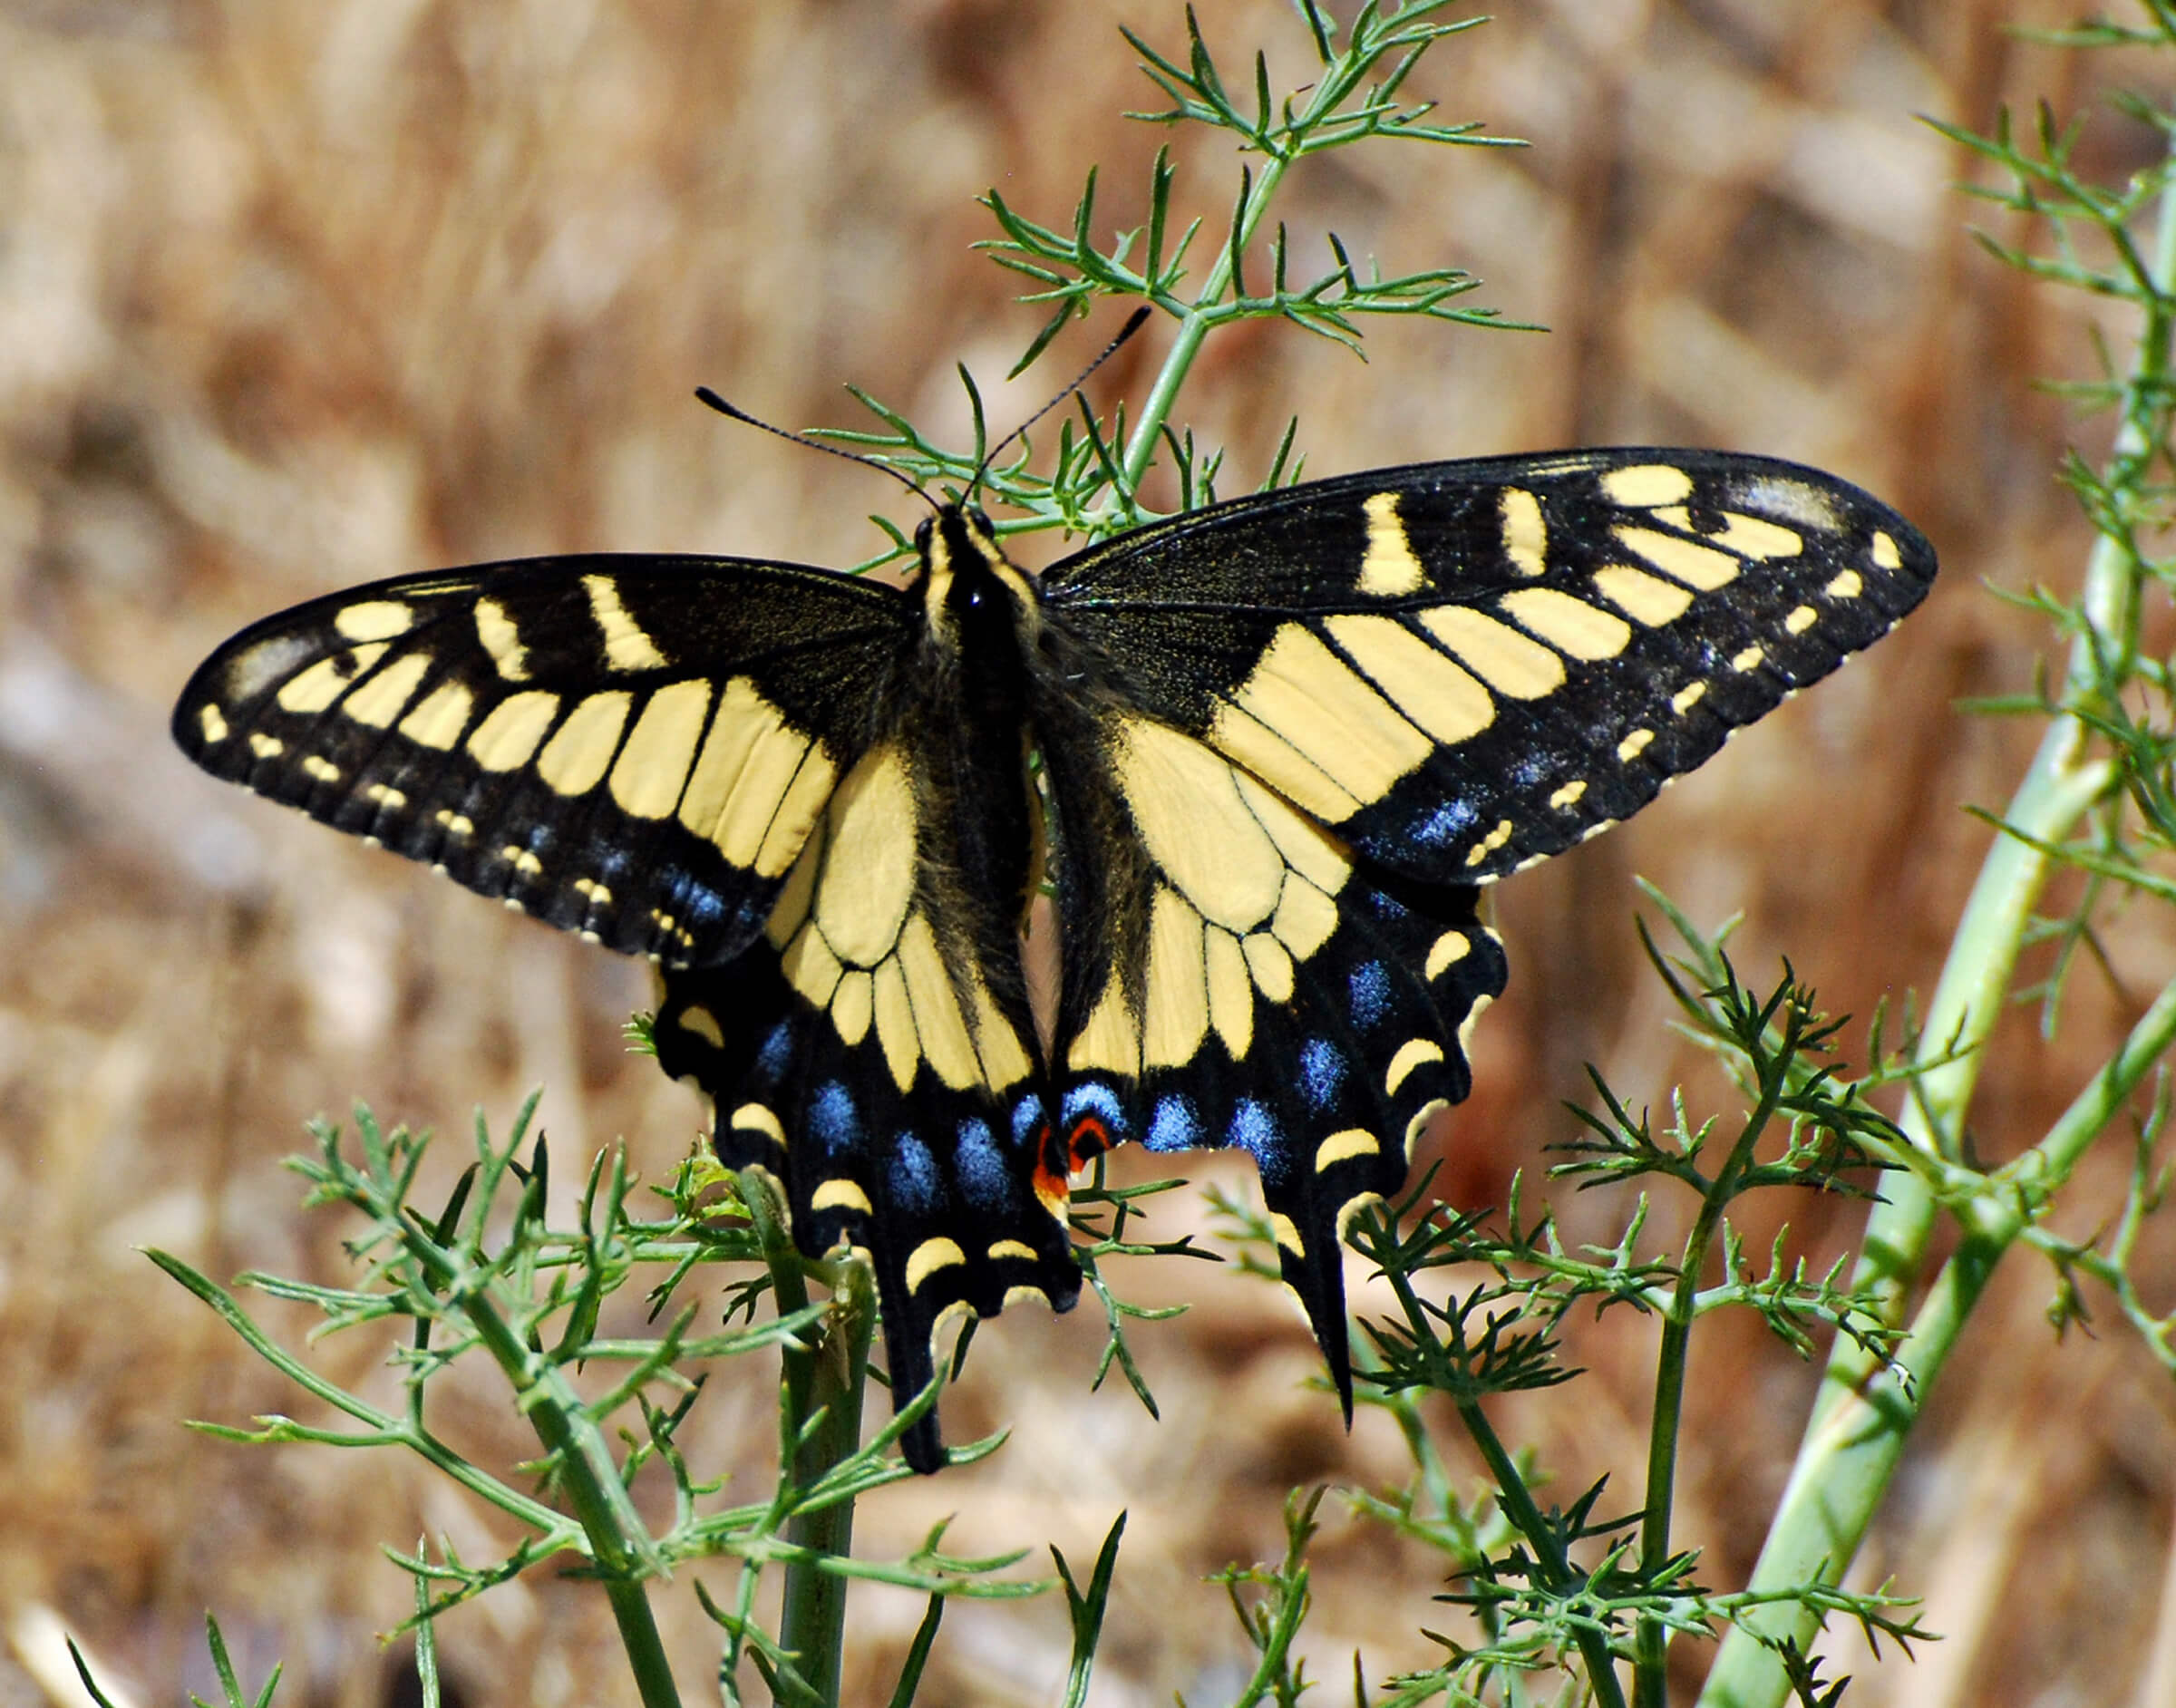 The female butterfly can test the chemical composition of a plant. This Anise Swallowtail is on Sweet Fennel.